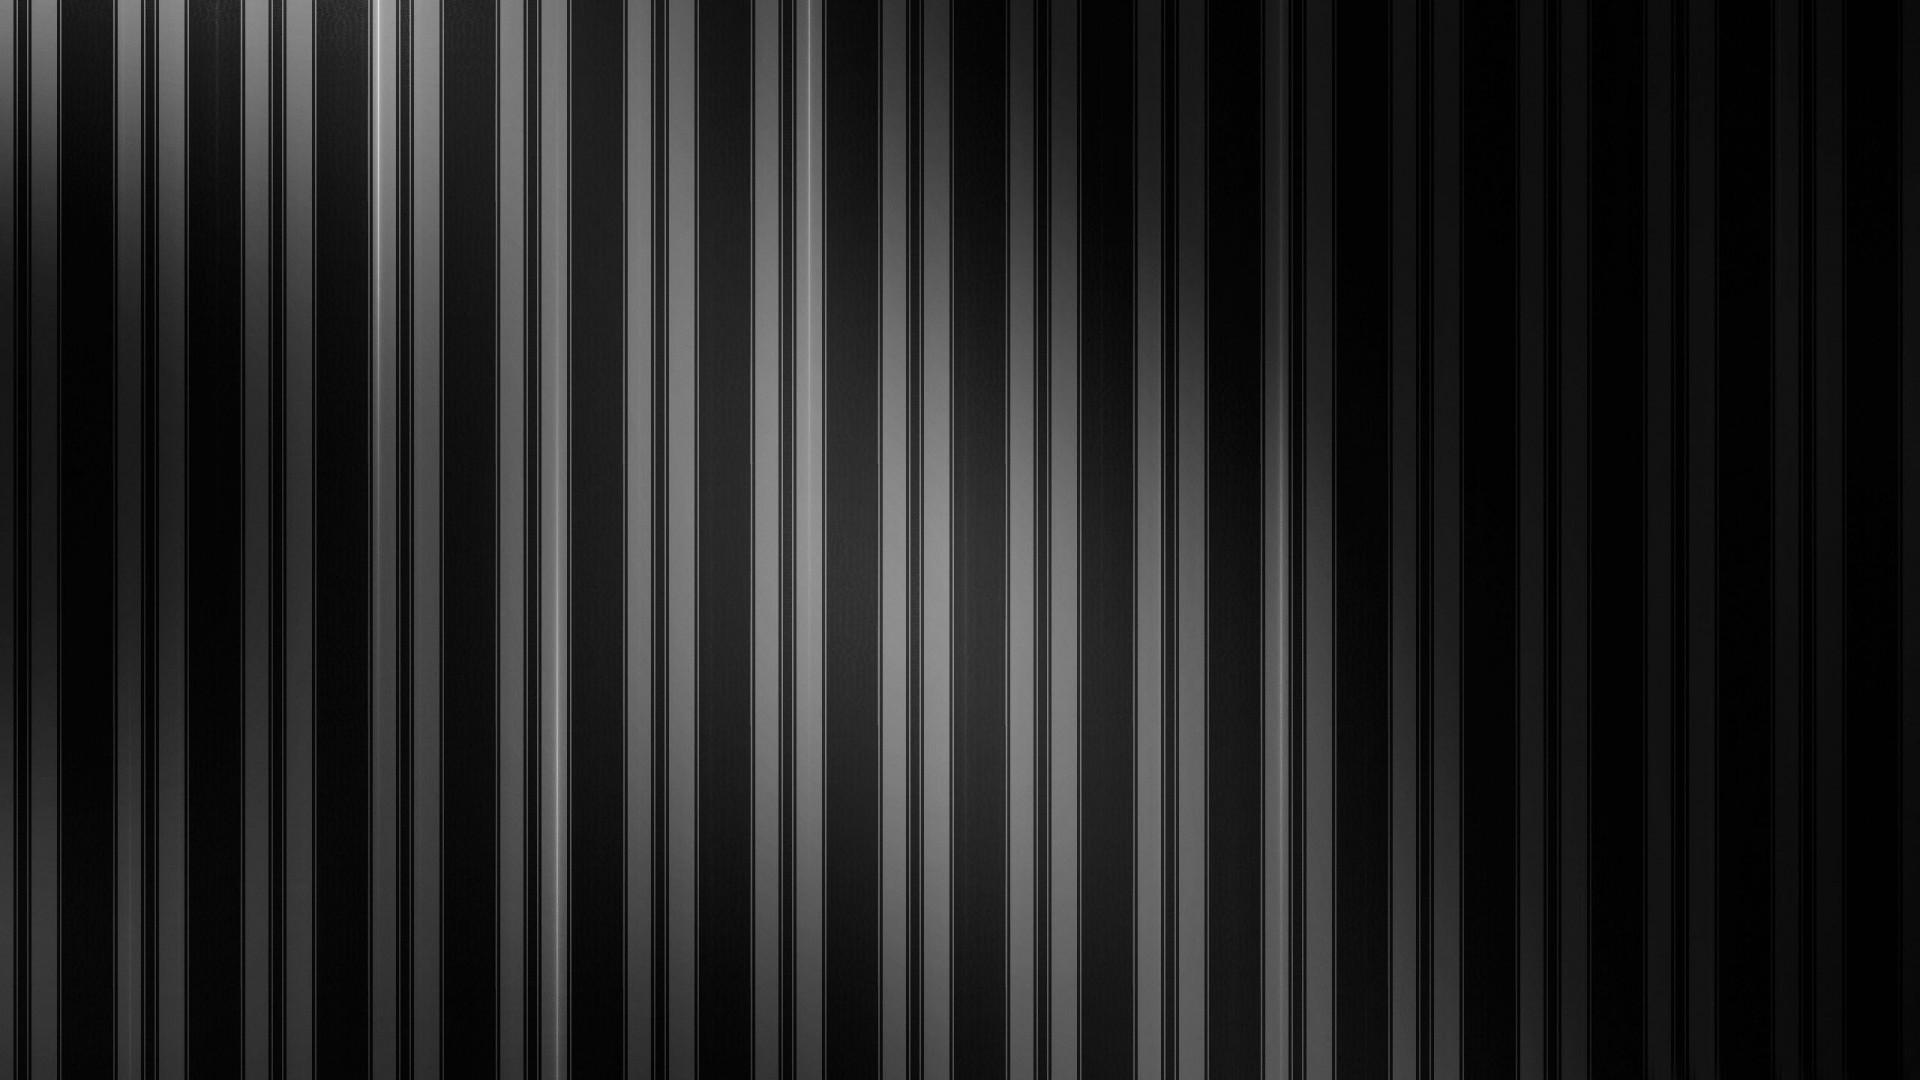 Free download Cool Black And White Striped Background Black